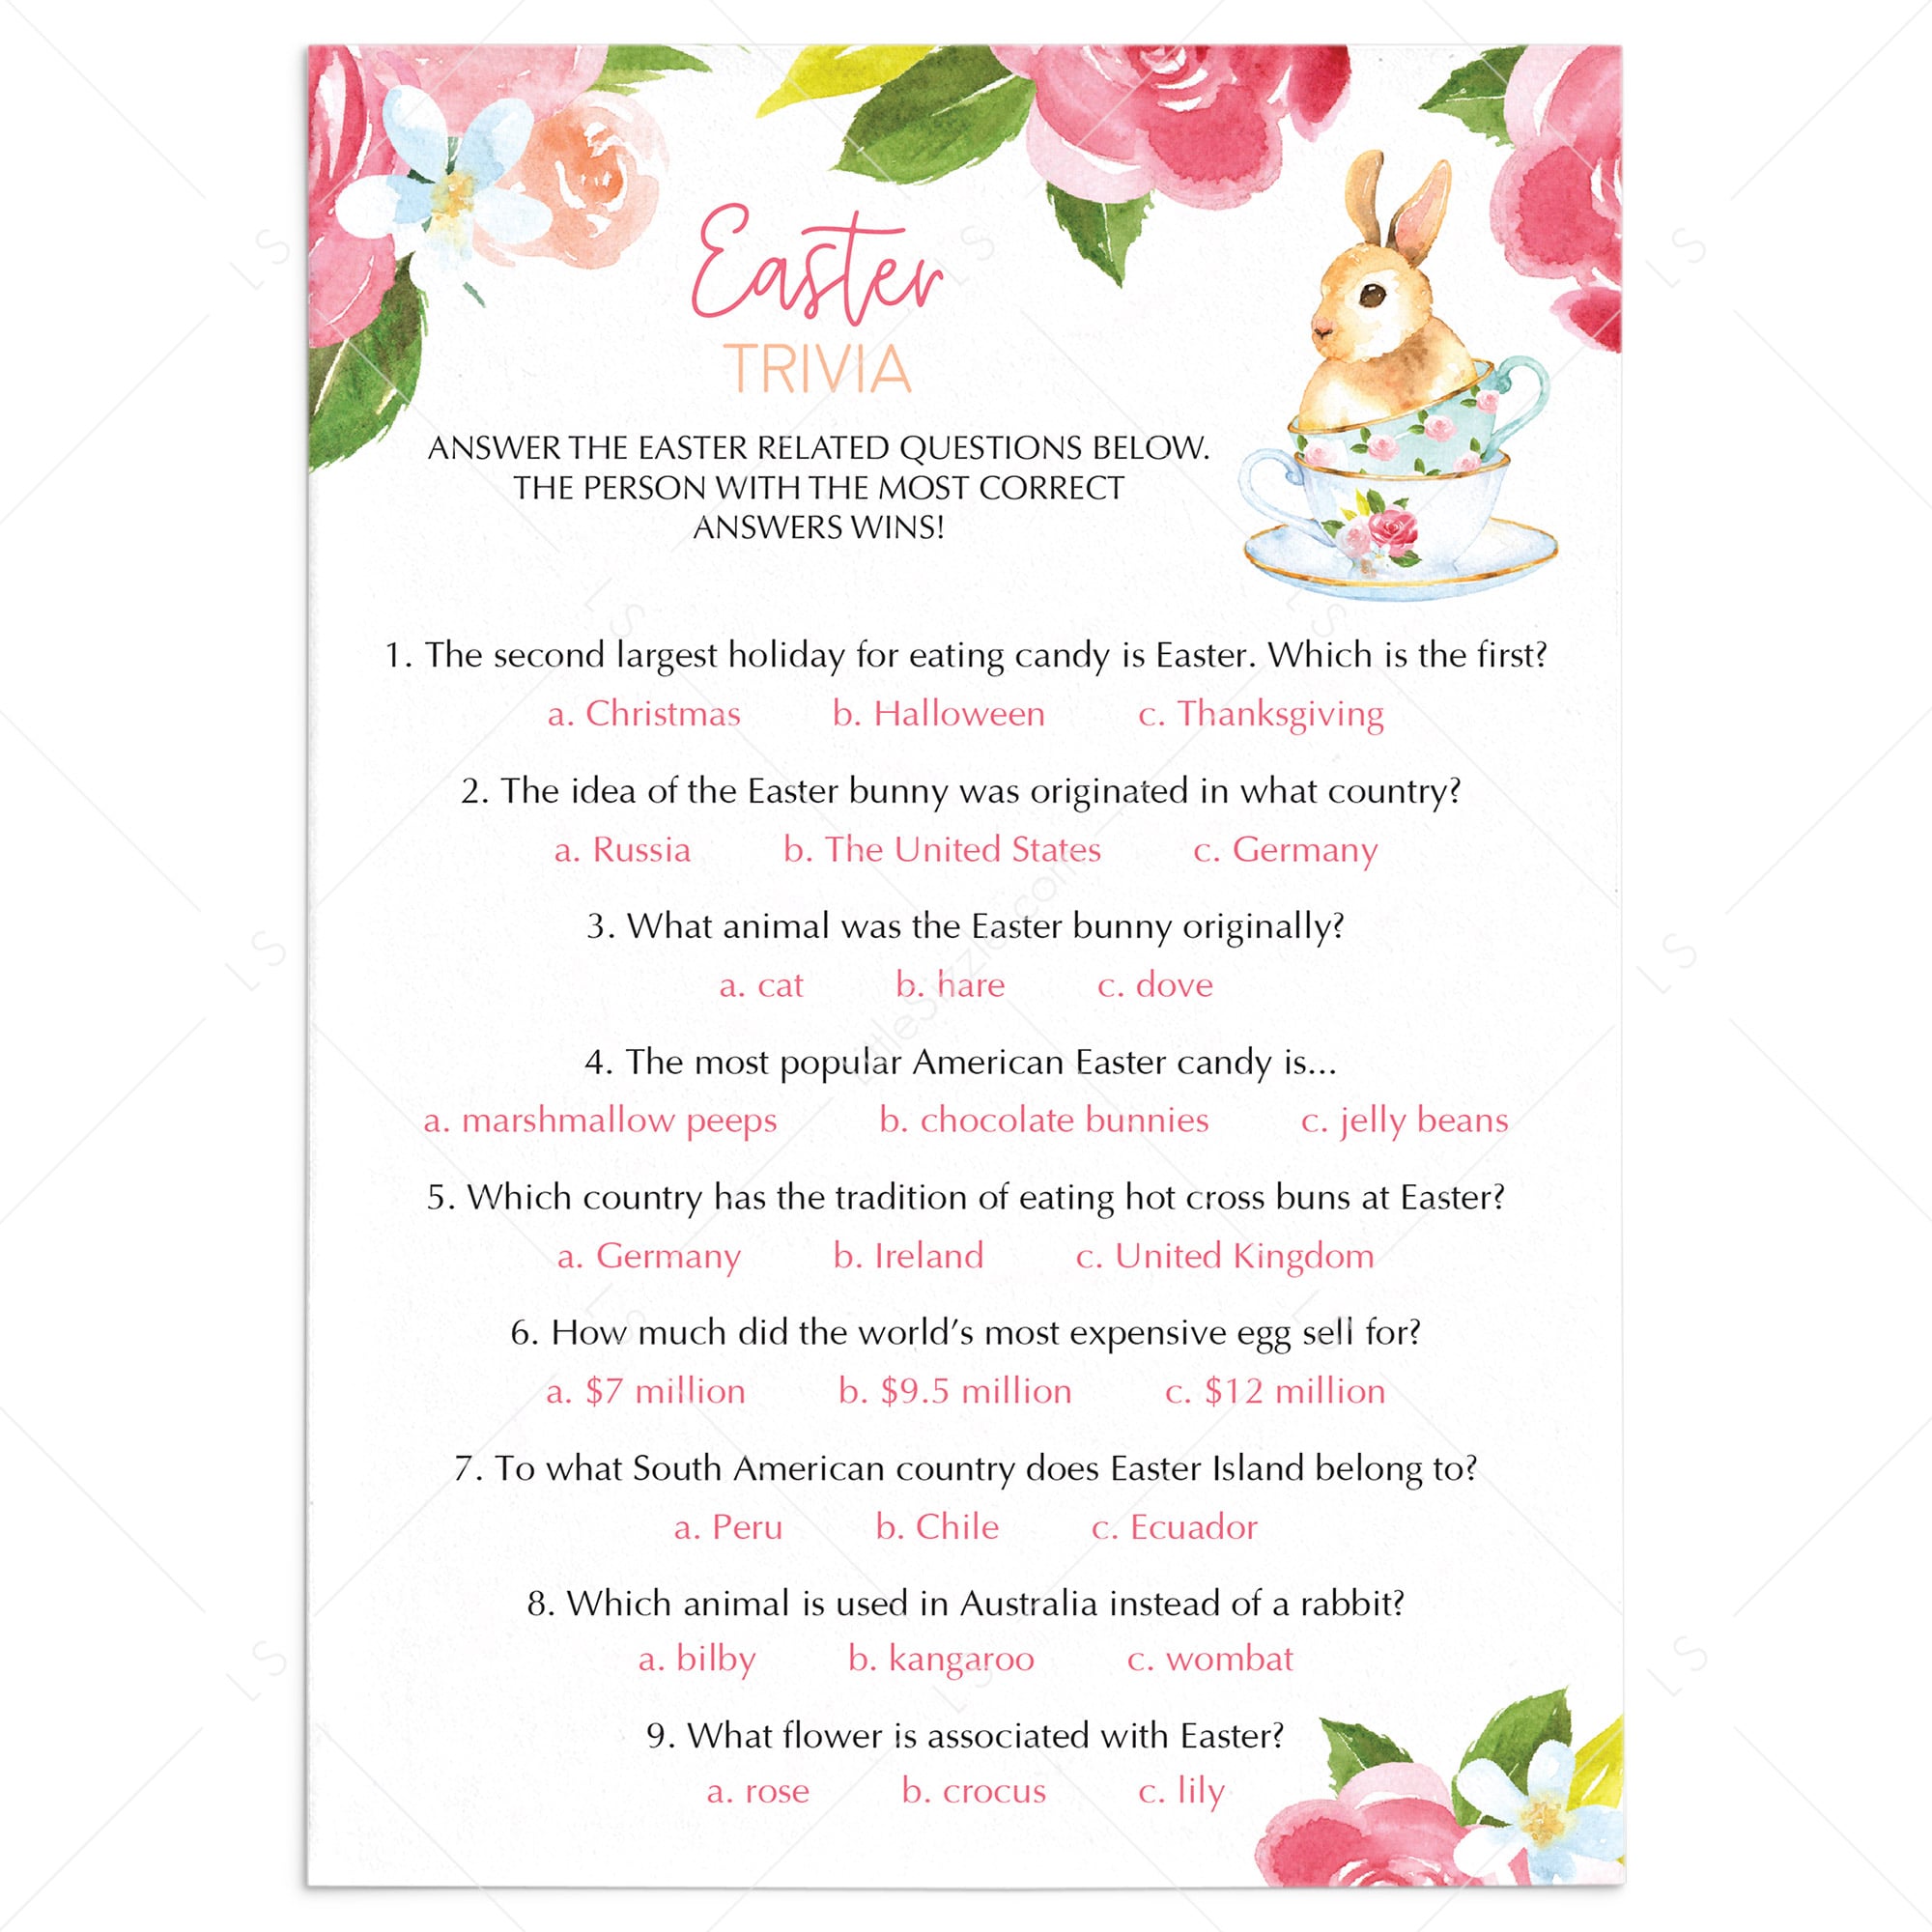 Easter Trivia Game To Print or Play Online